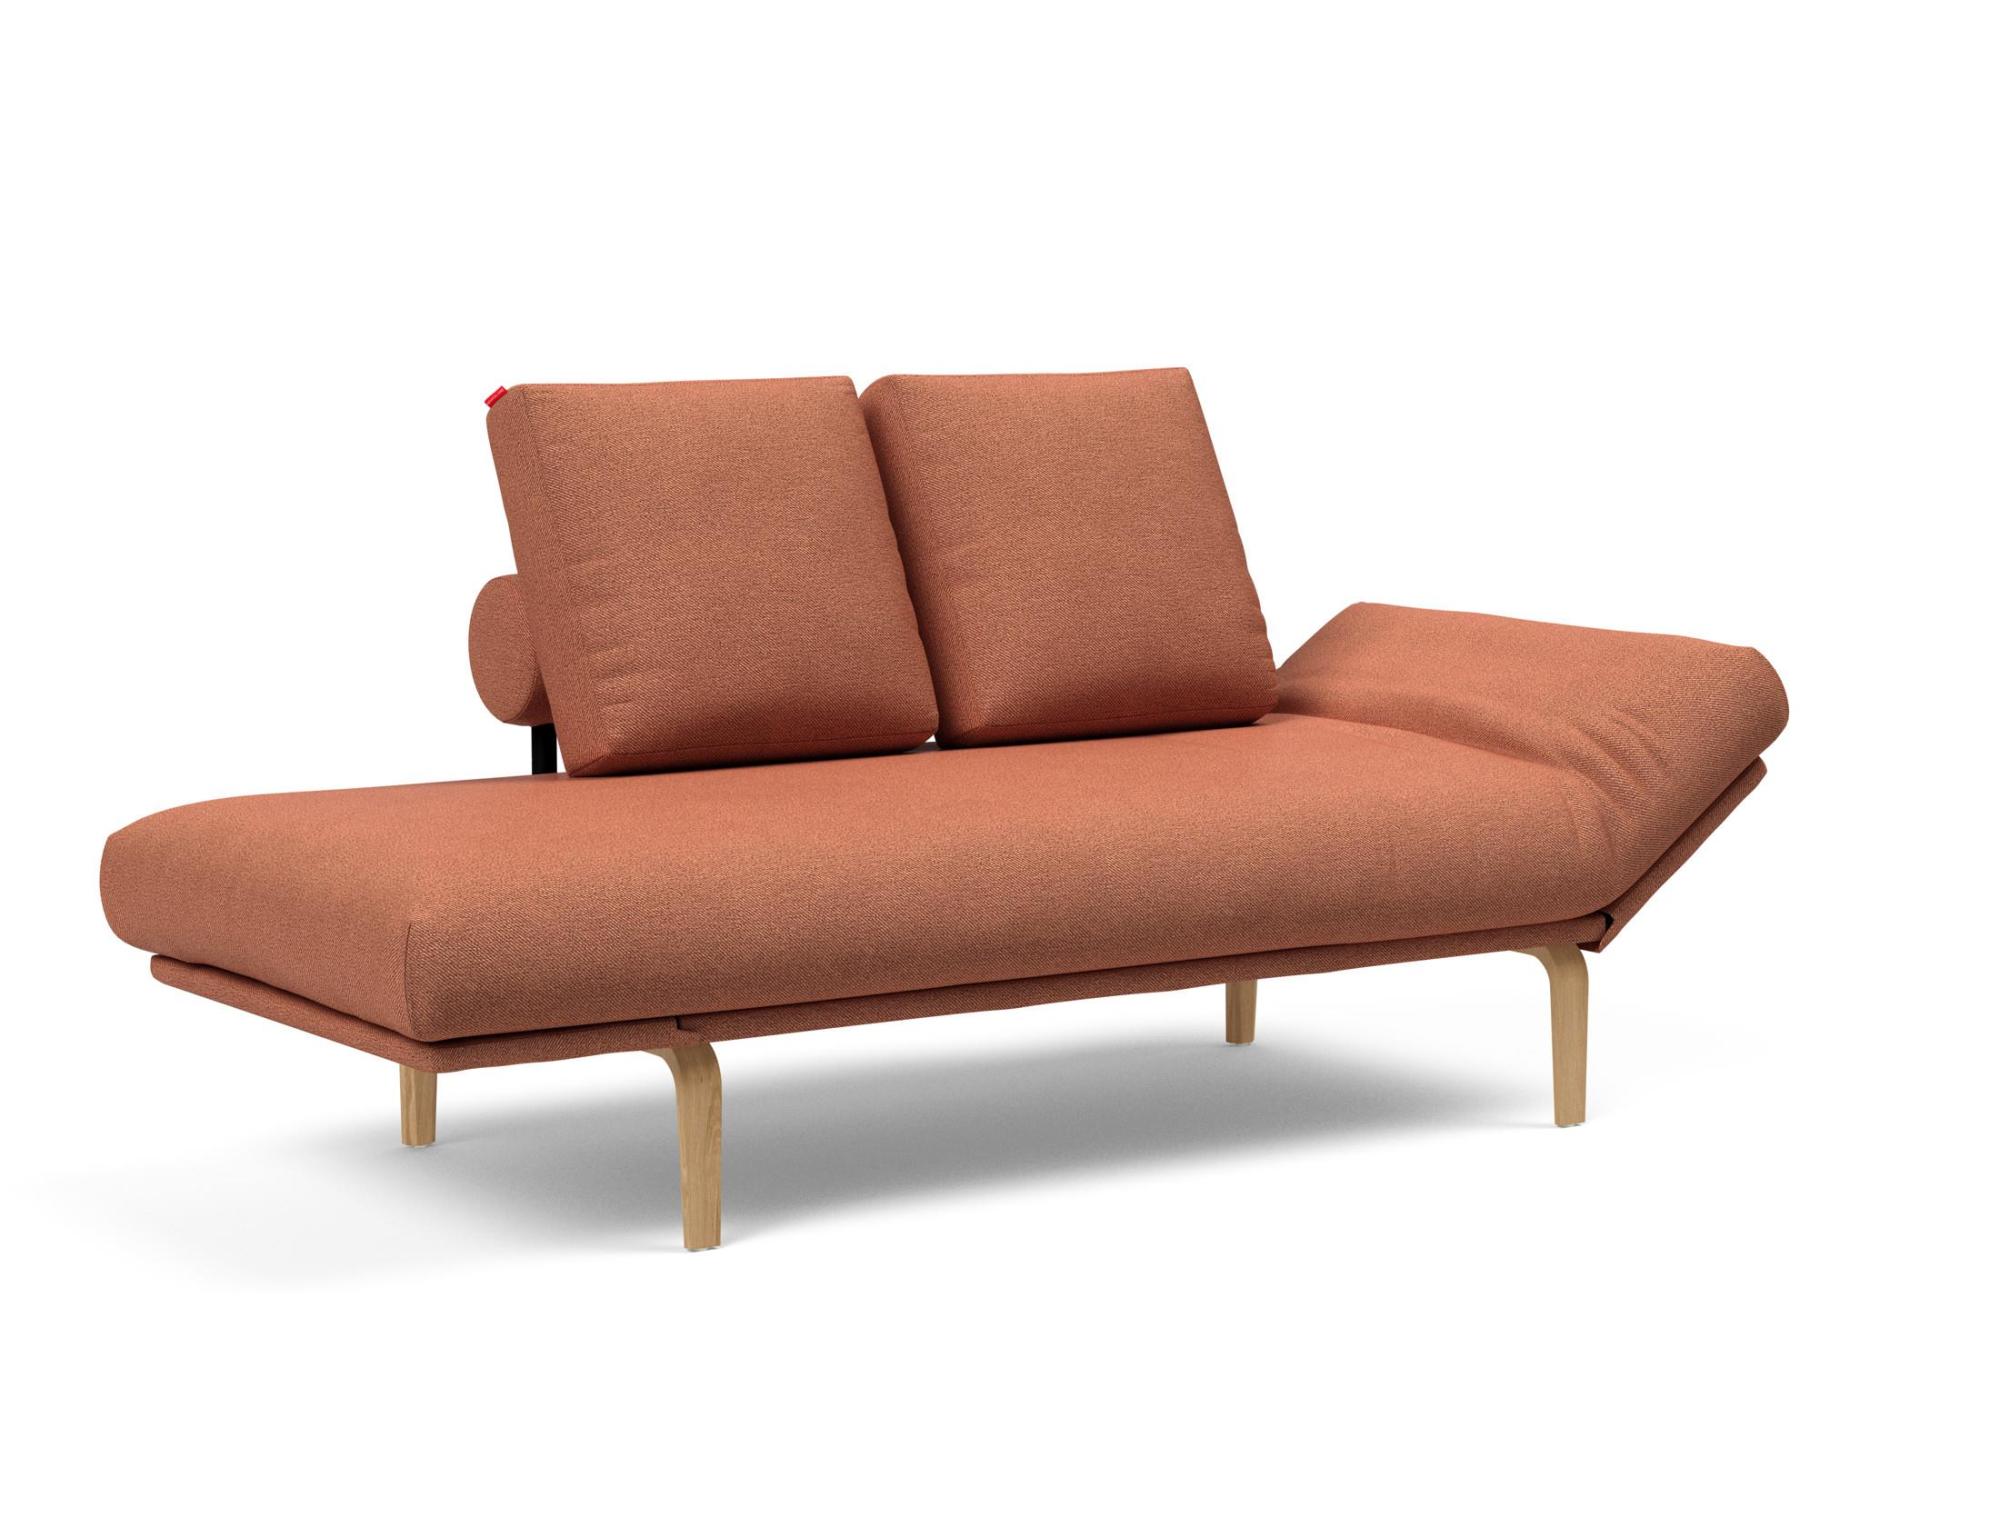 Liege/Daybed Liege/Daybed Rollo - Innovation Sofas